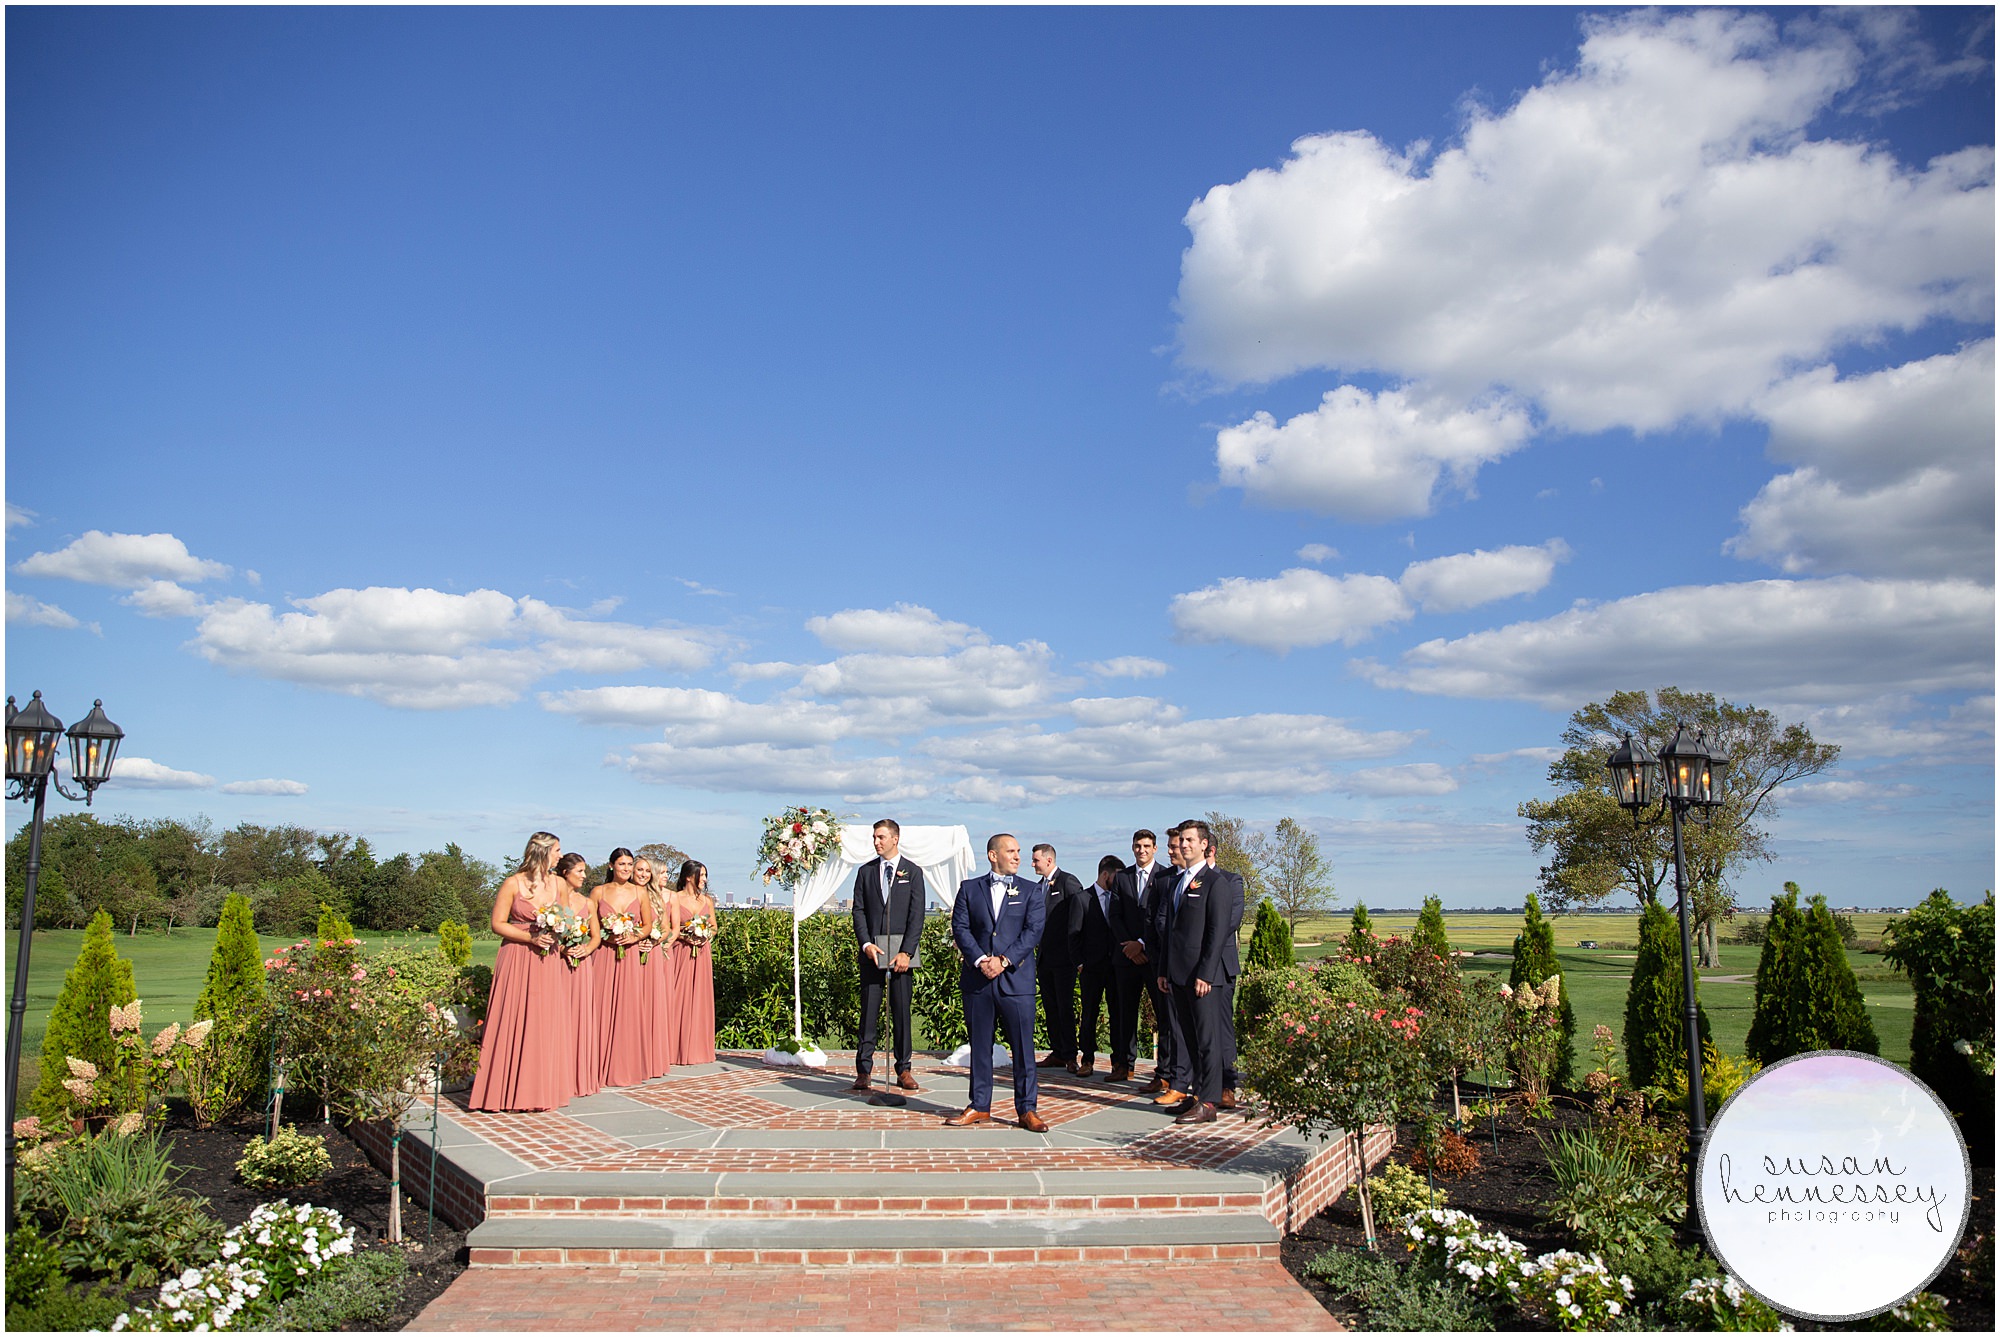 Susan Hennessey Photography Best of 2020 Weddings - Ceremony at Atlantic City Country Club wedding